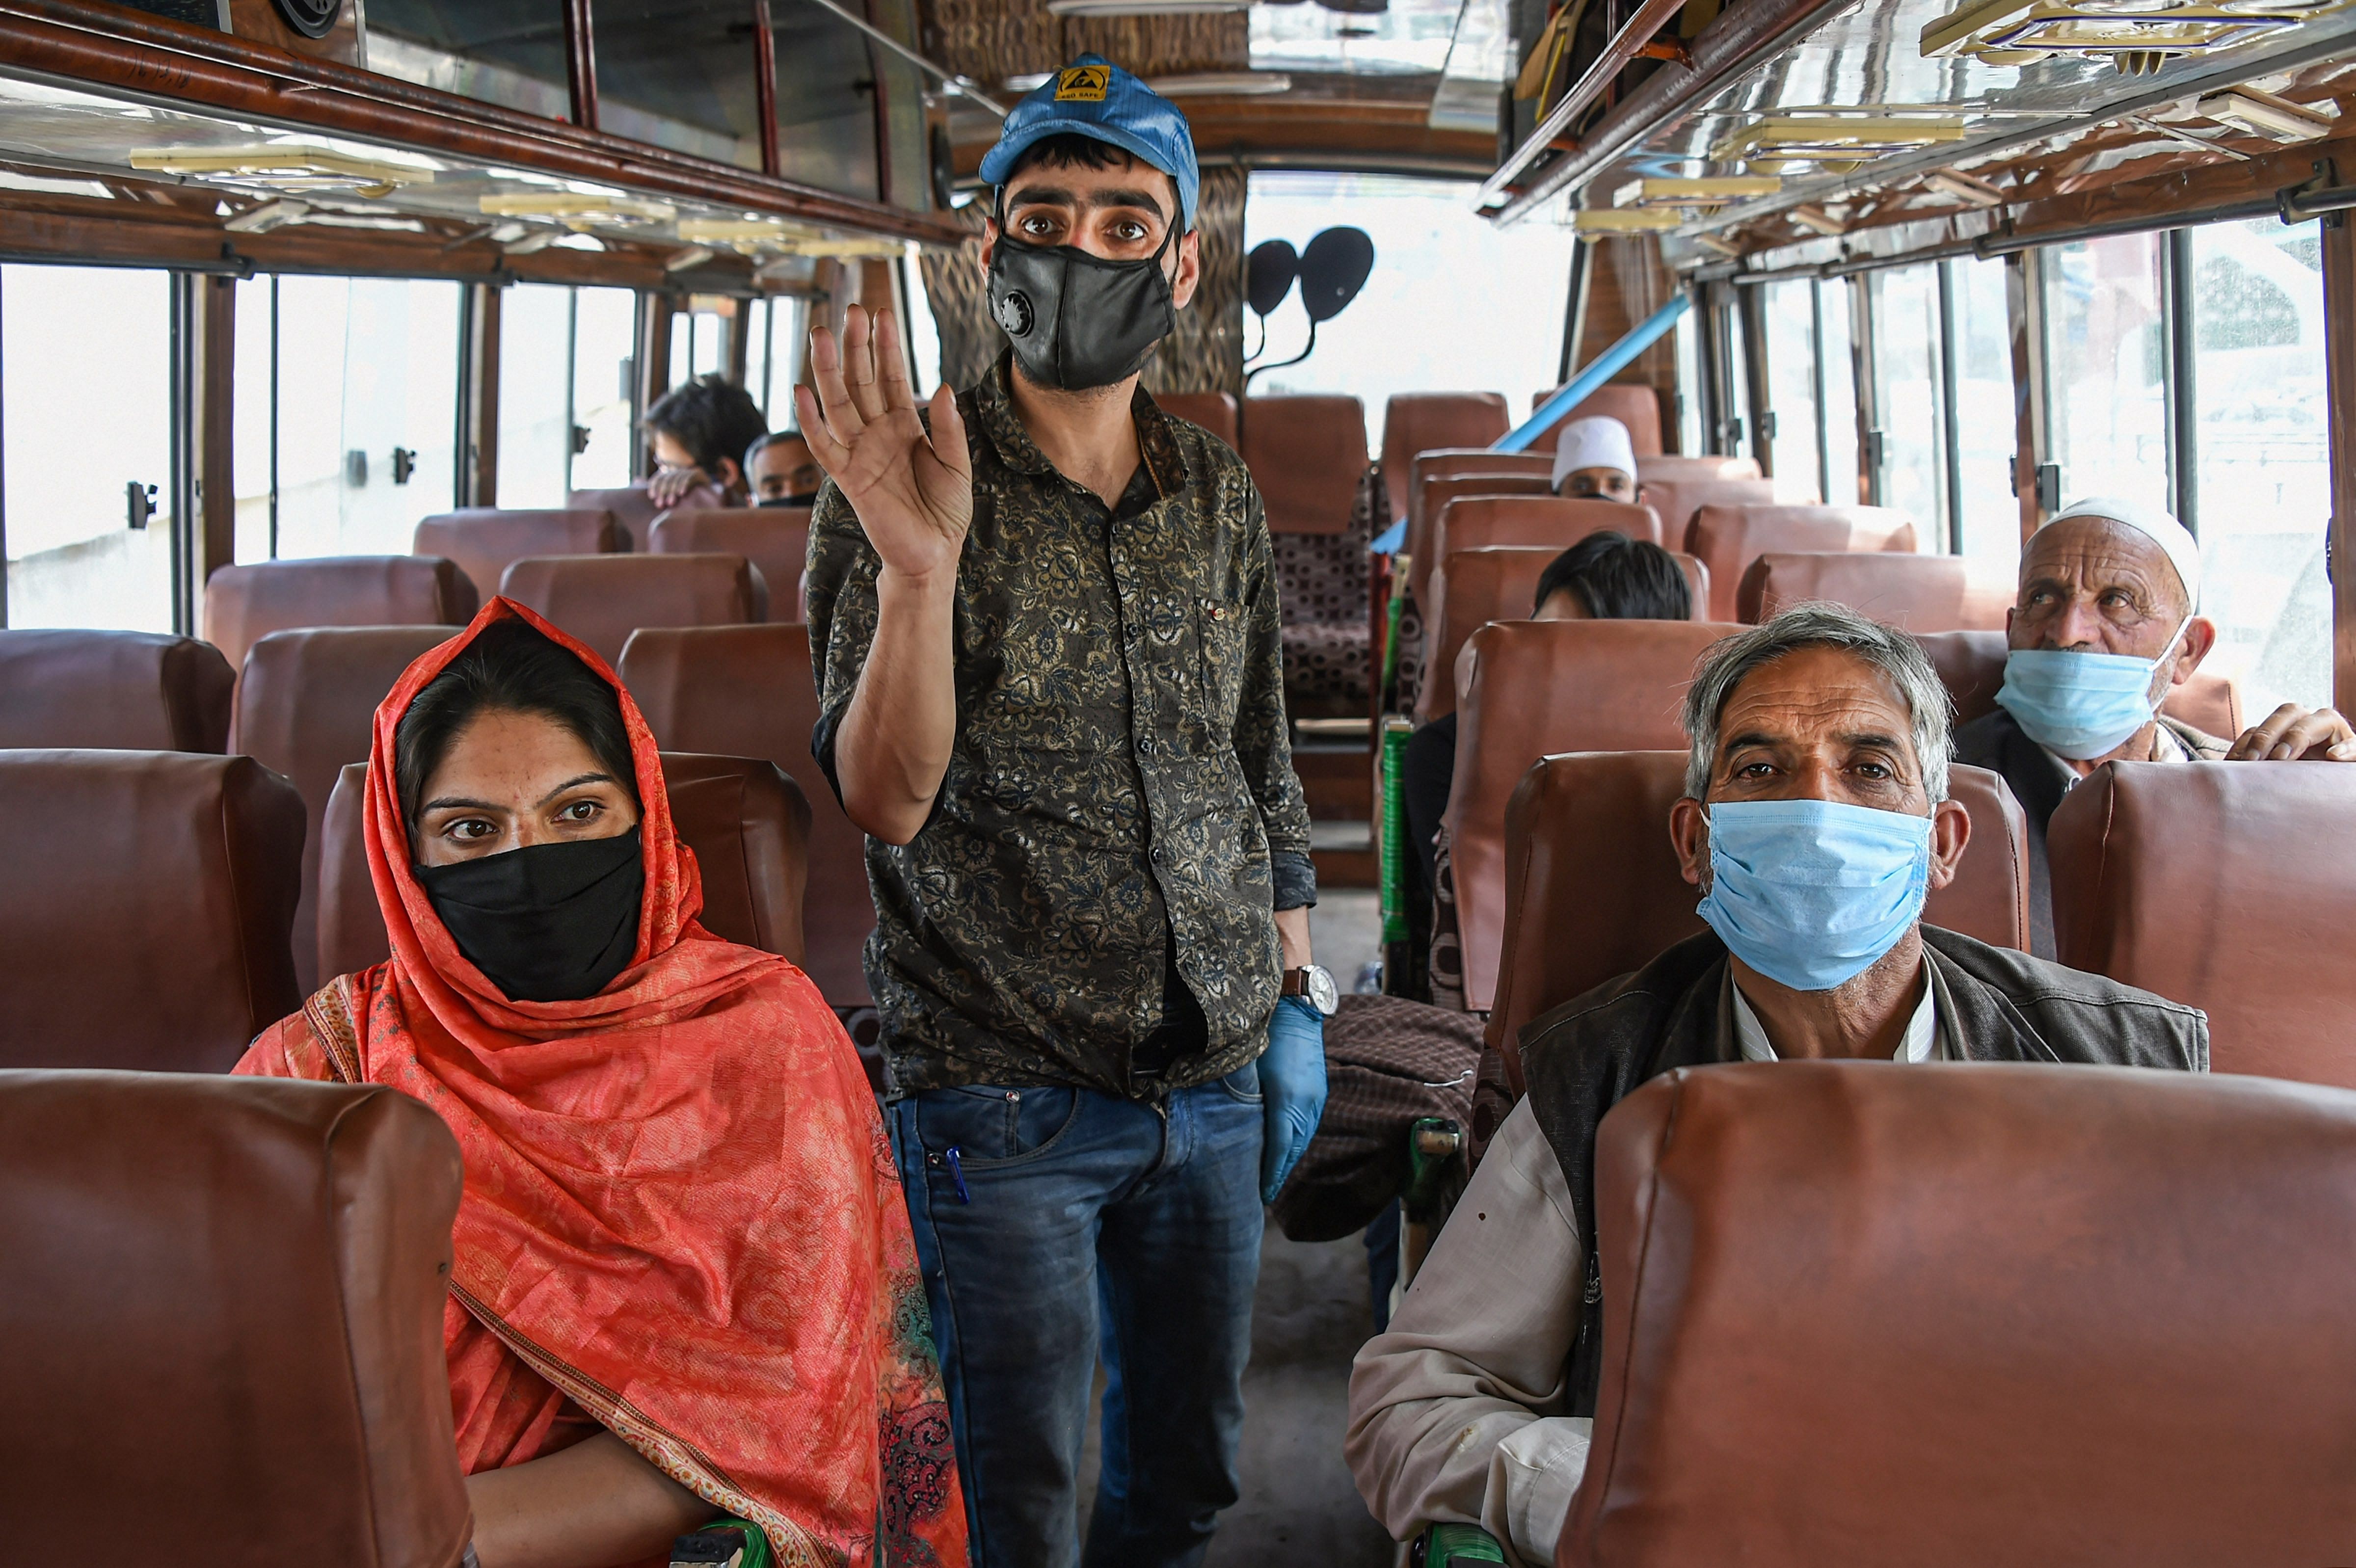 Kashmiri businessman and students, who were stranded in different parts of the country, arrive in a bus at Tourist Reception Center during the nationwide COVID-19 lockdown, in Srinagar. (PTI)